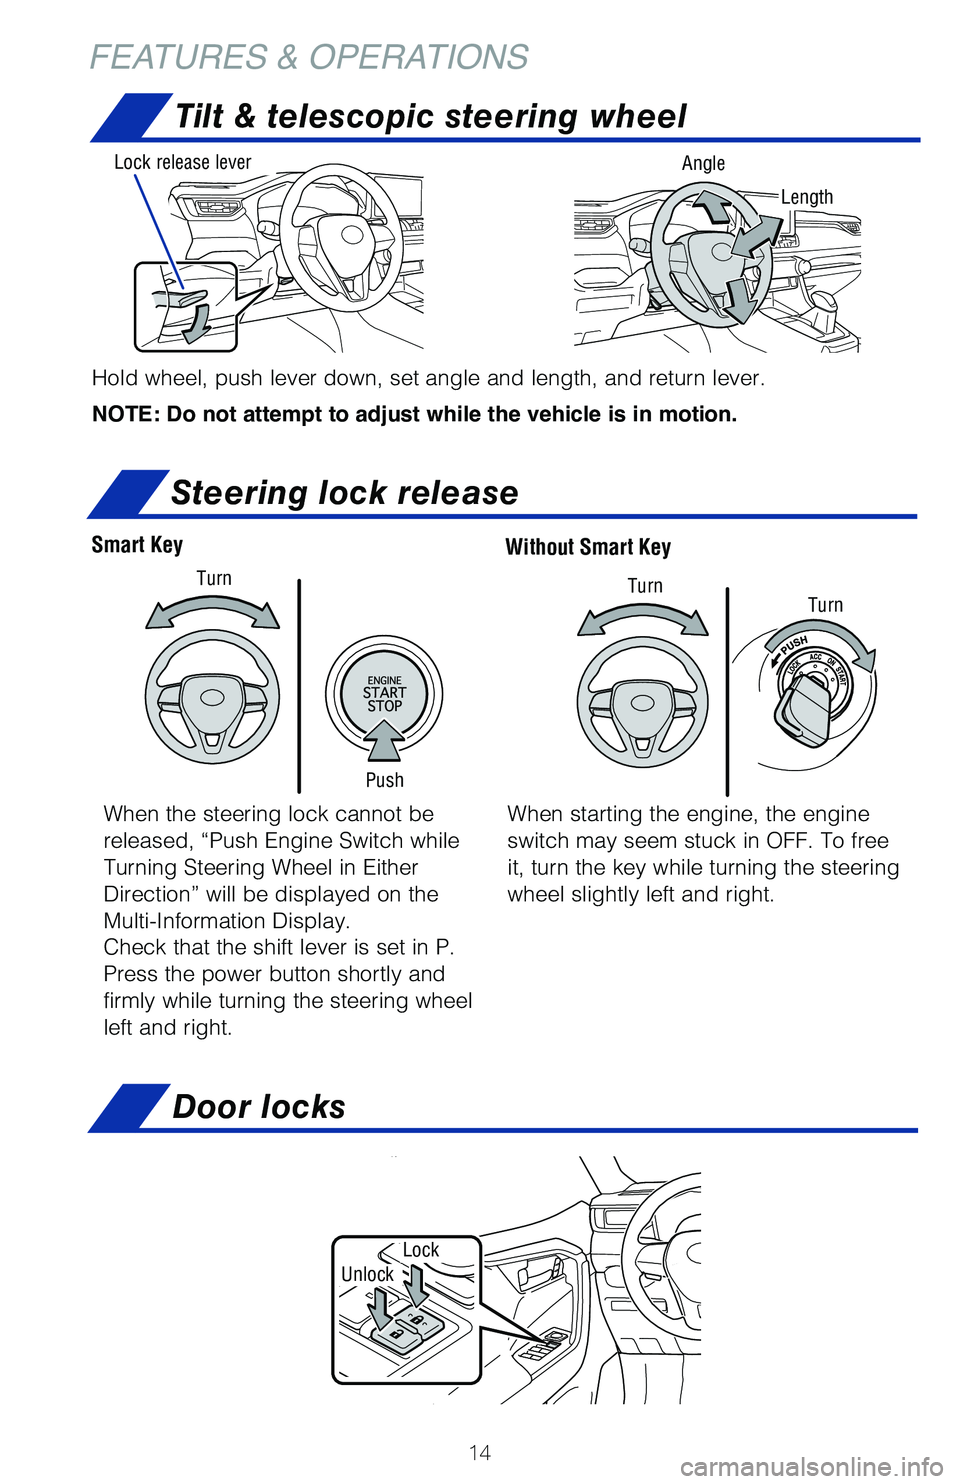 TOYOTA RAV4 2021  Owners Manual (in English) 14
Smart KeyWithout Smart Key
Steering lock release
Push
Turn
Turn
Turn
When the steering lock cannot be 
released, “Push Engine Switch while 
Turning Steering Wheel in Either 
Direction” will be 